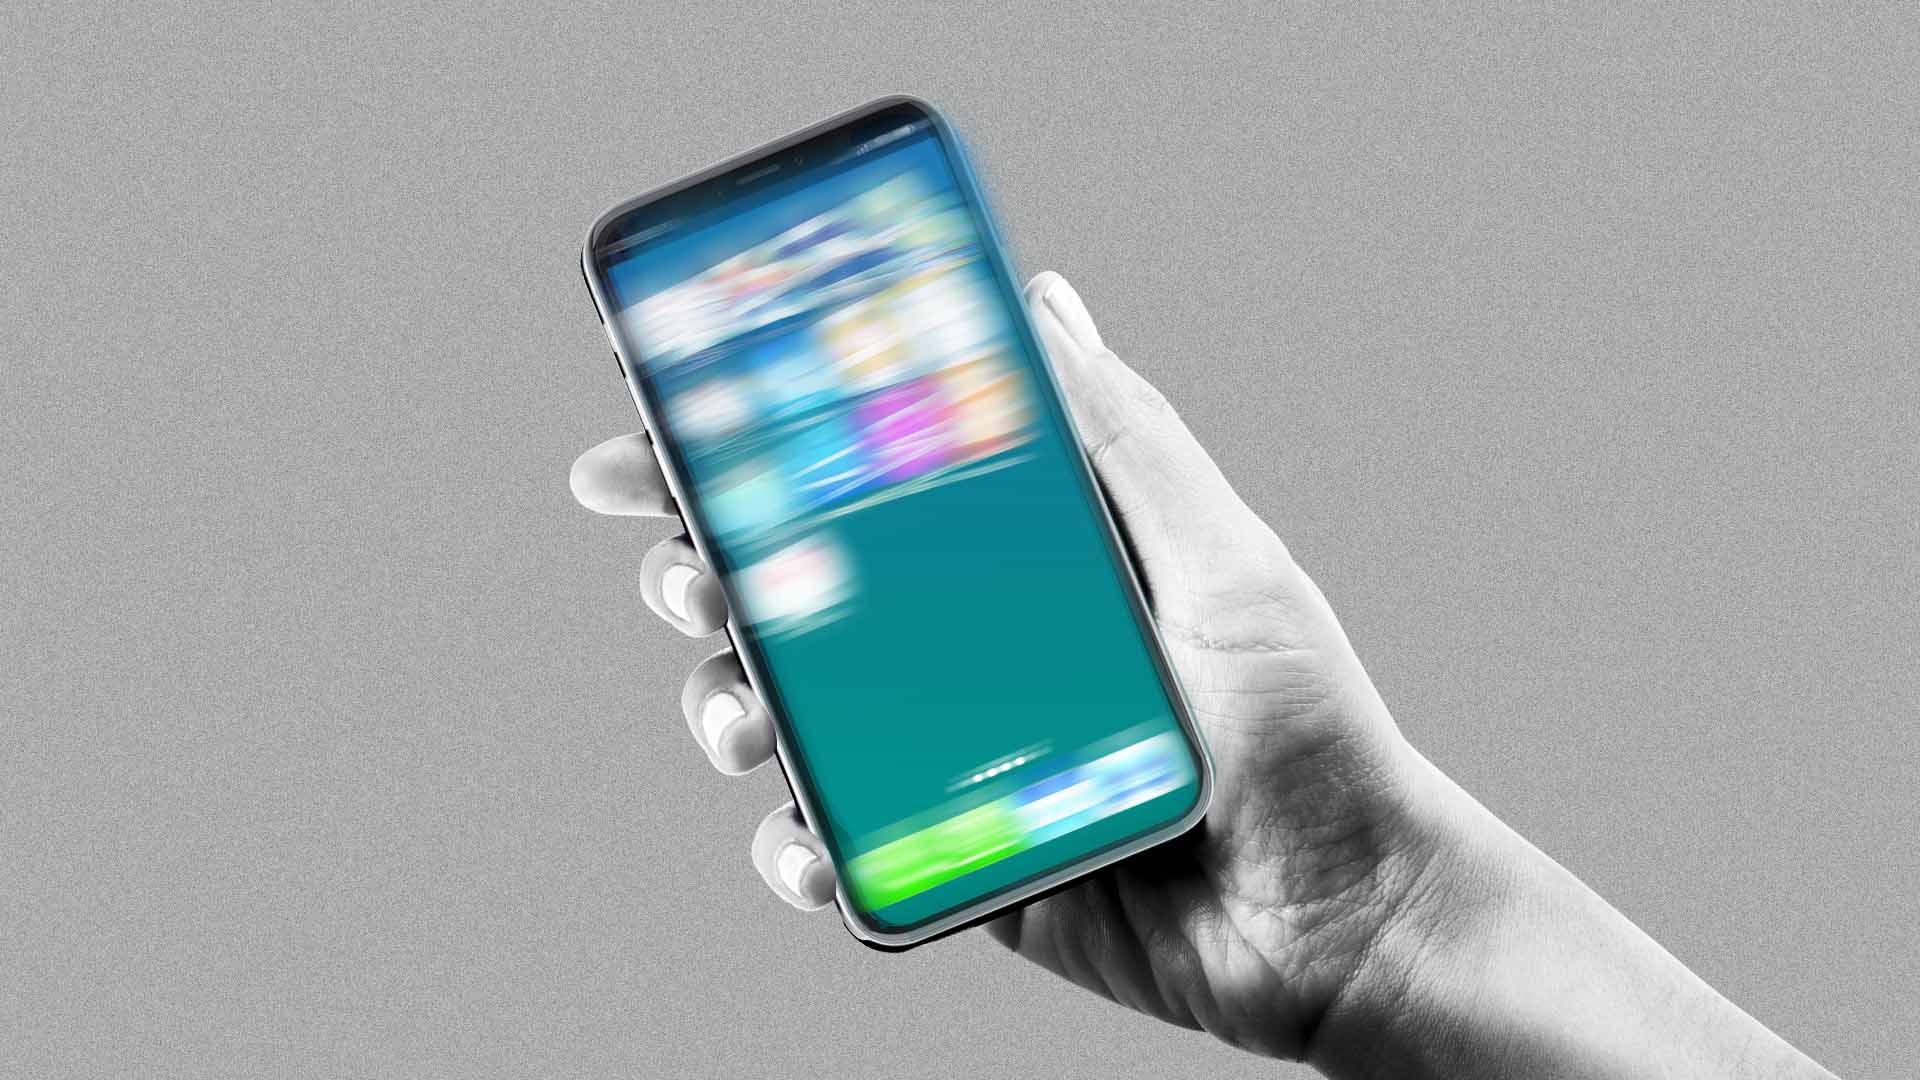 In this illustration, a phone screen is shown to be blurred while someone holds it